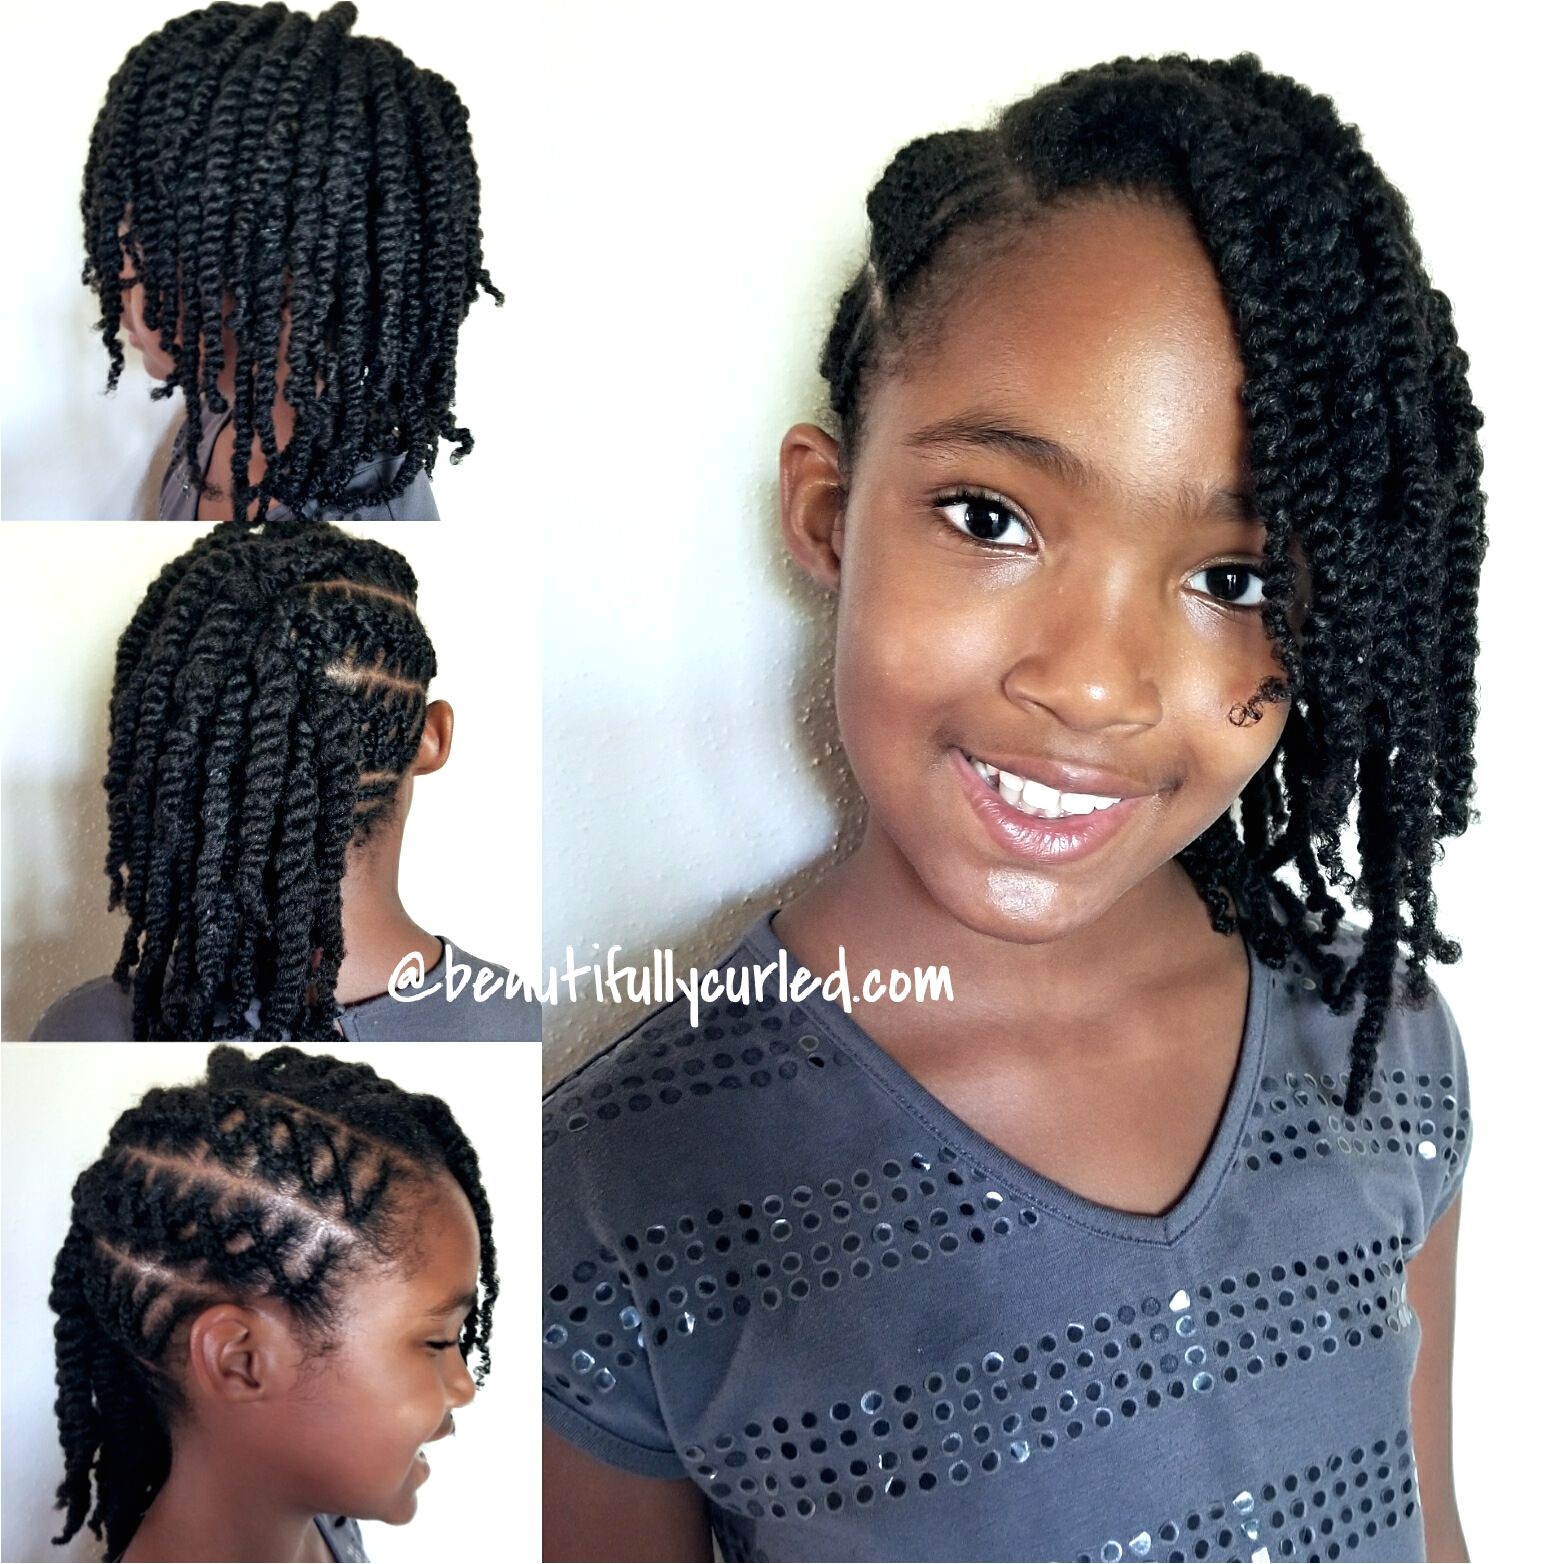 Criss Cross Cornrow Braids with Side Twists First Attempt naturalhair cornrows protectivestyles beautifullycurled